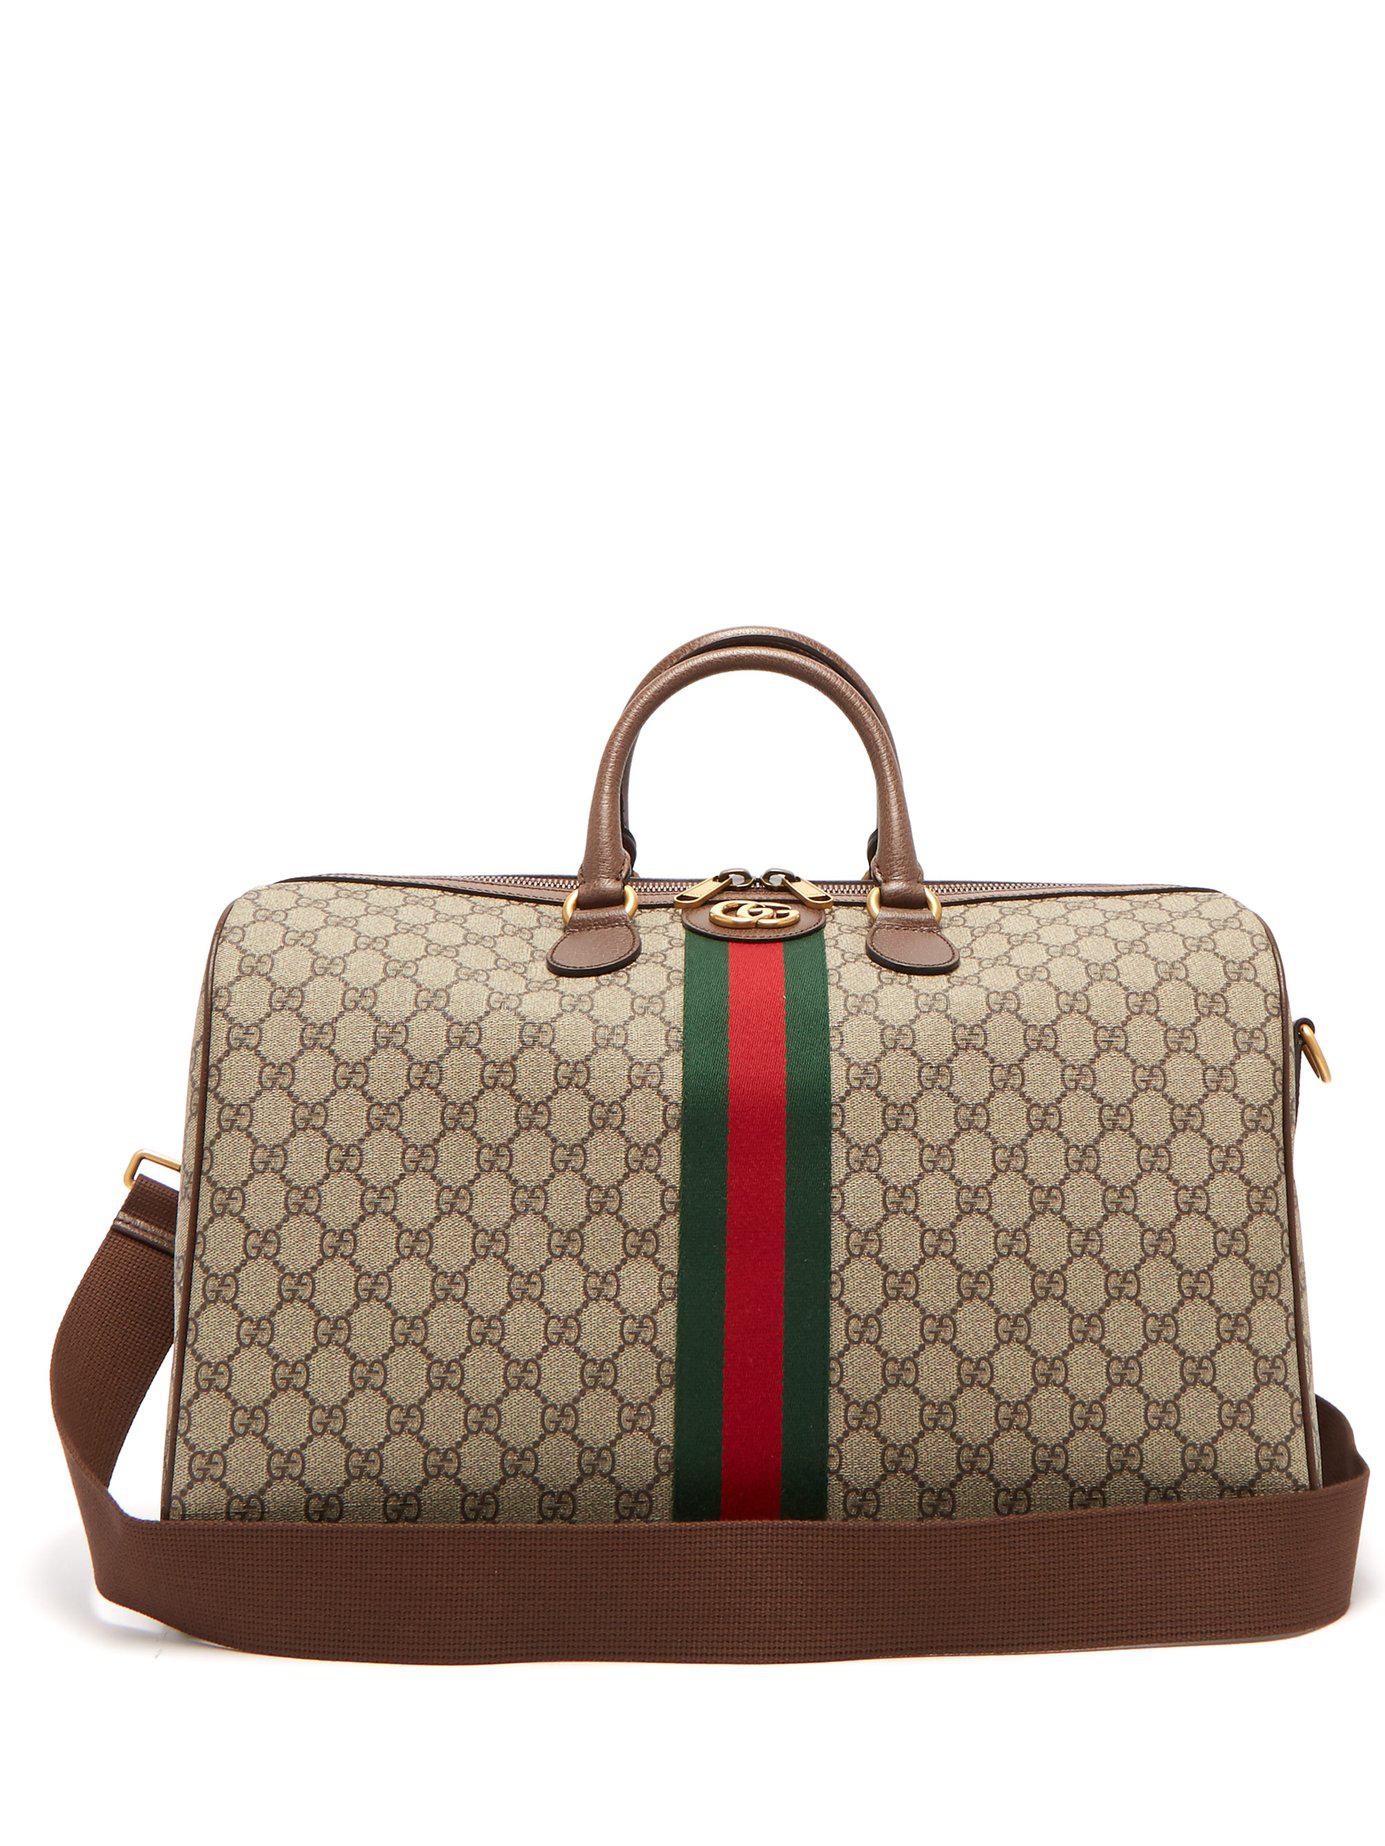 Gucci Canvas Ophidia Gg Supreme Logo Weekend Bag - Lyst